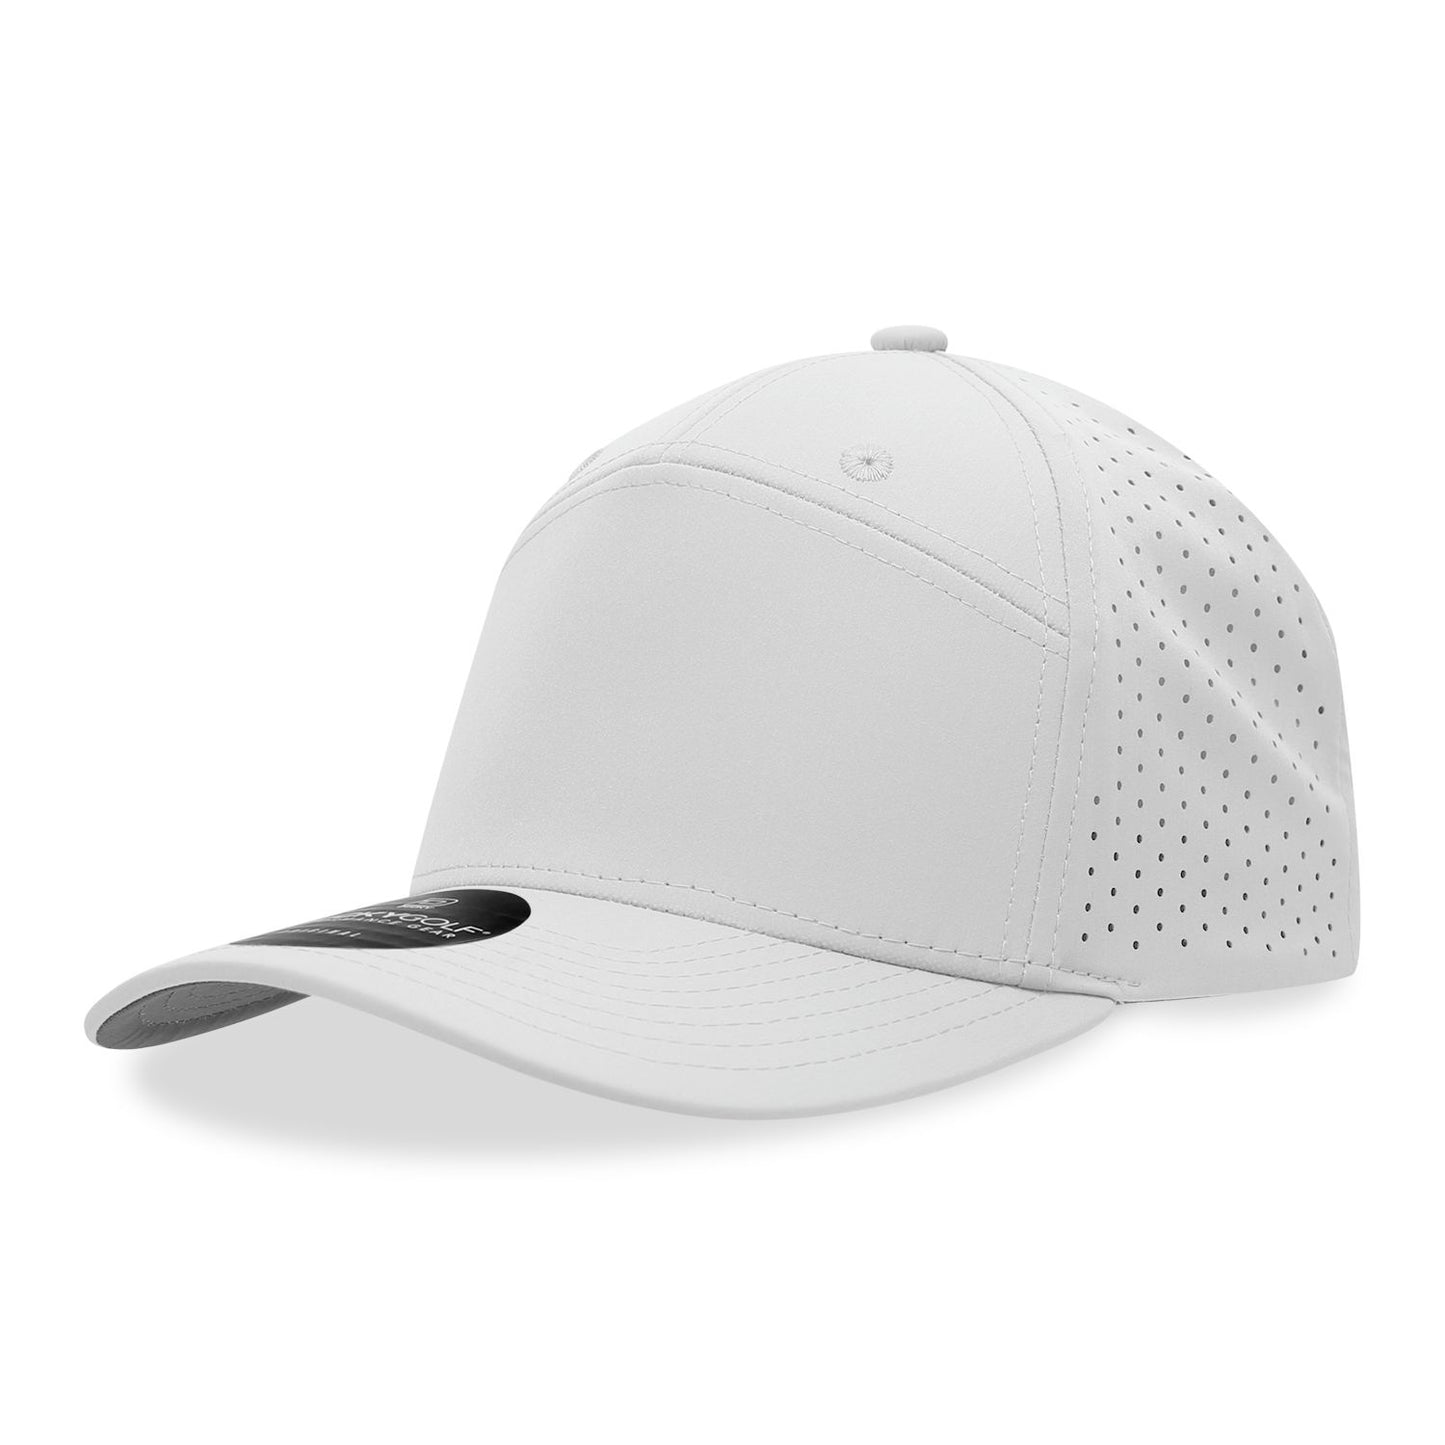 Decky 6416 7 Panel Perforated Cap - Blank